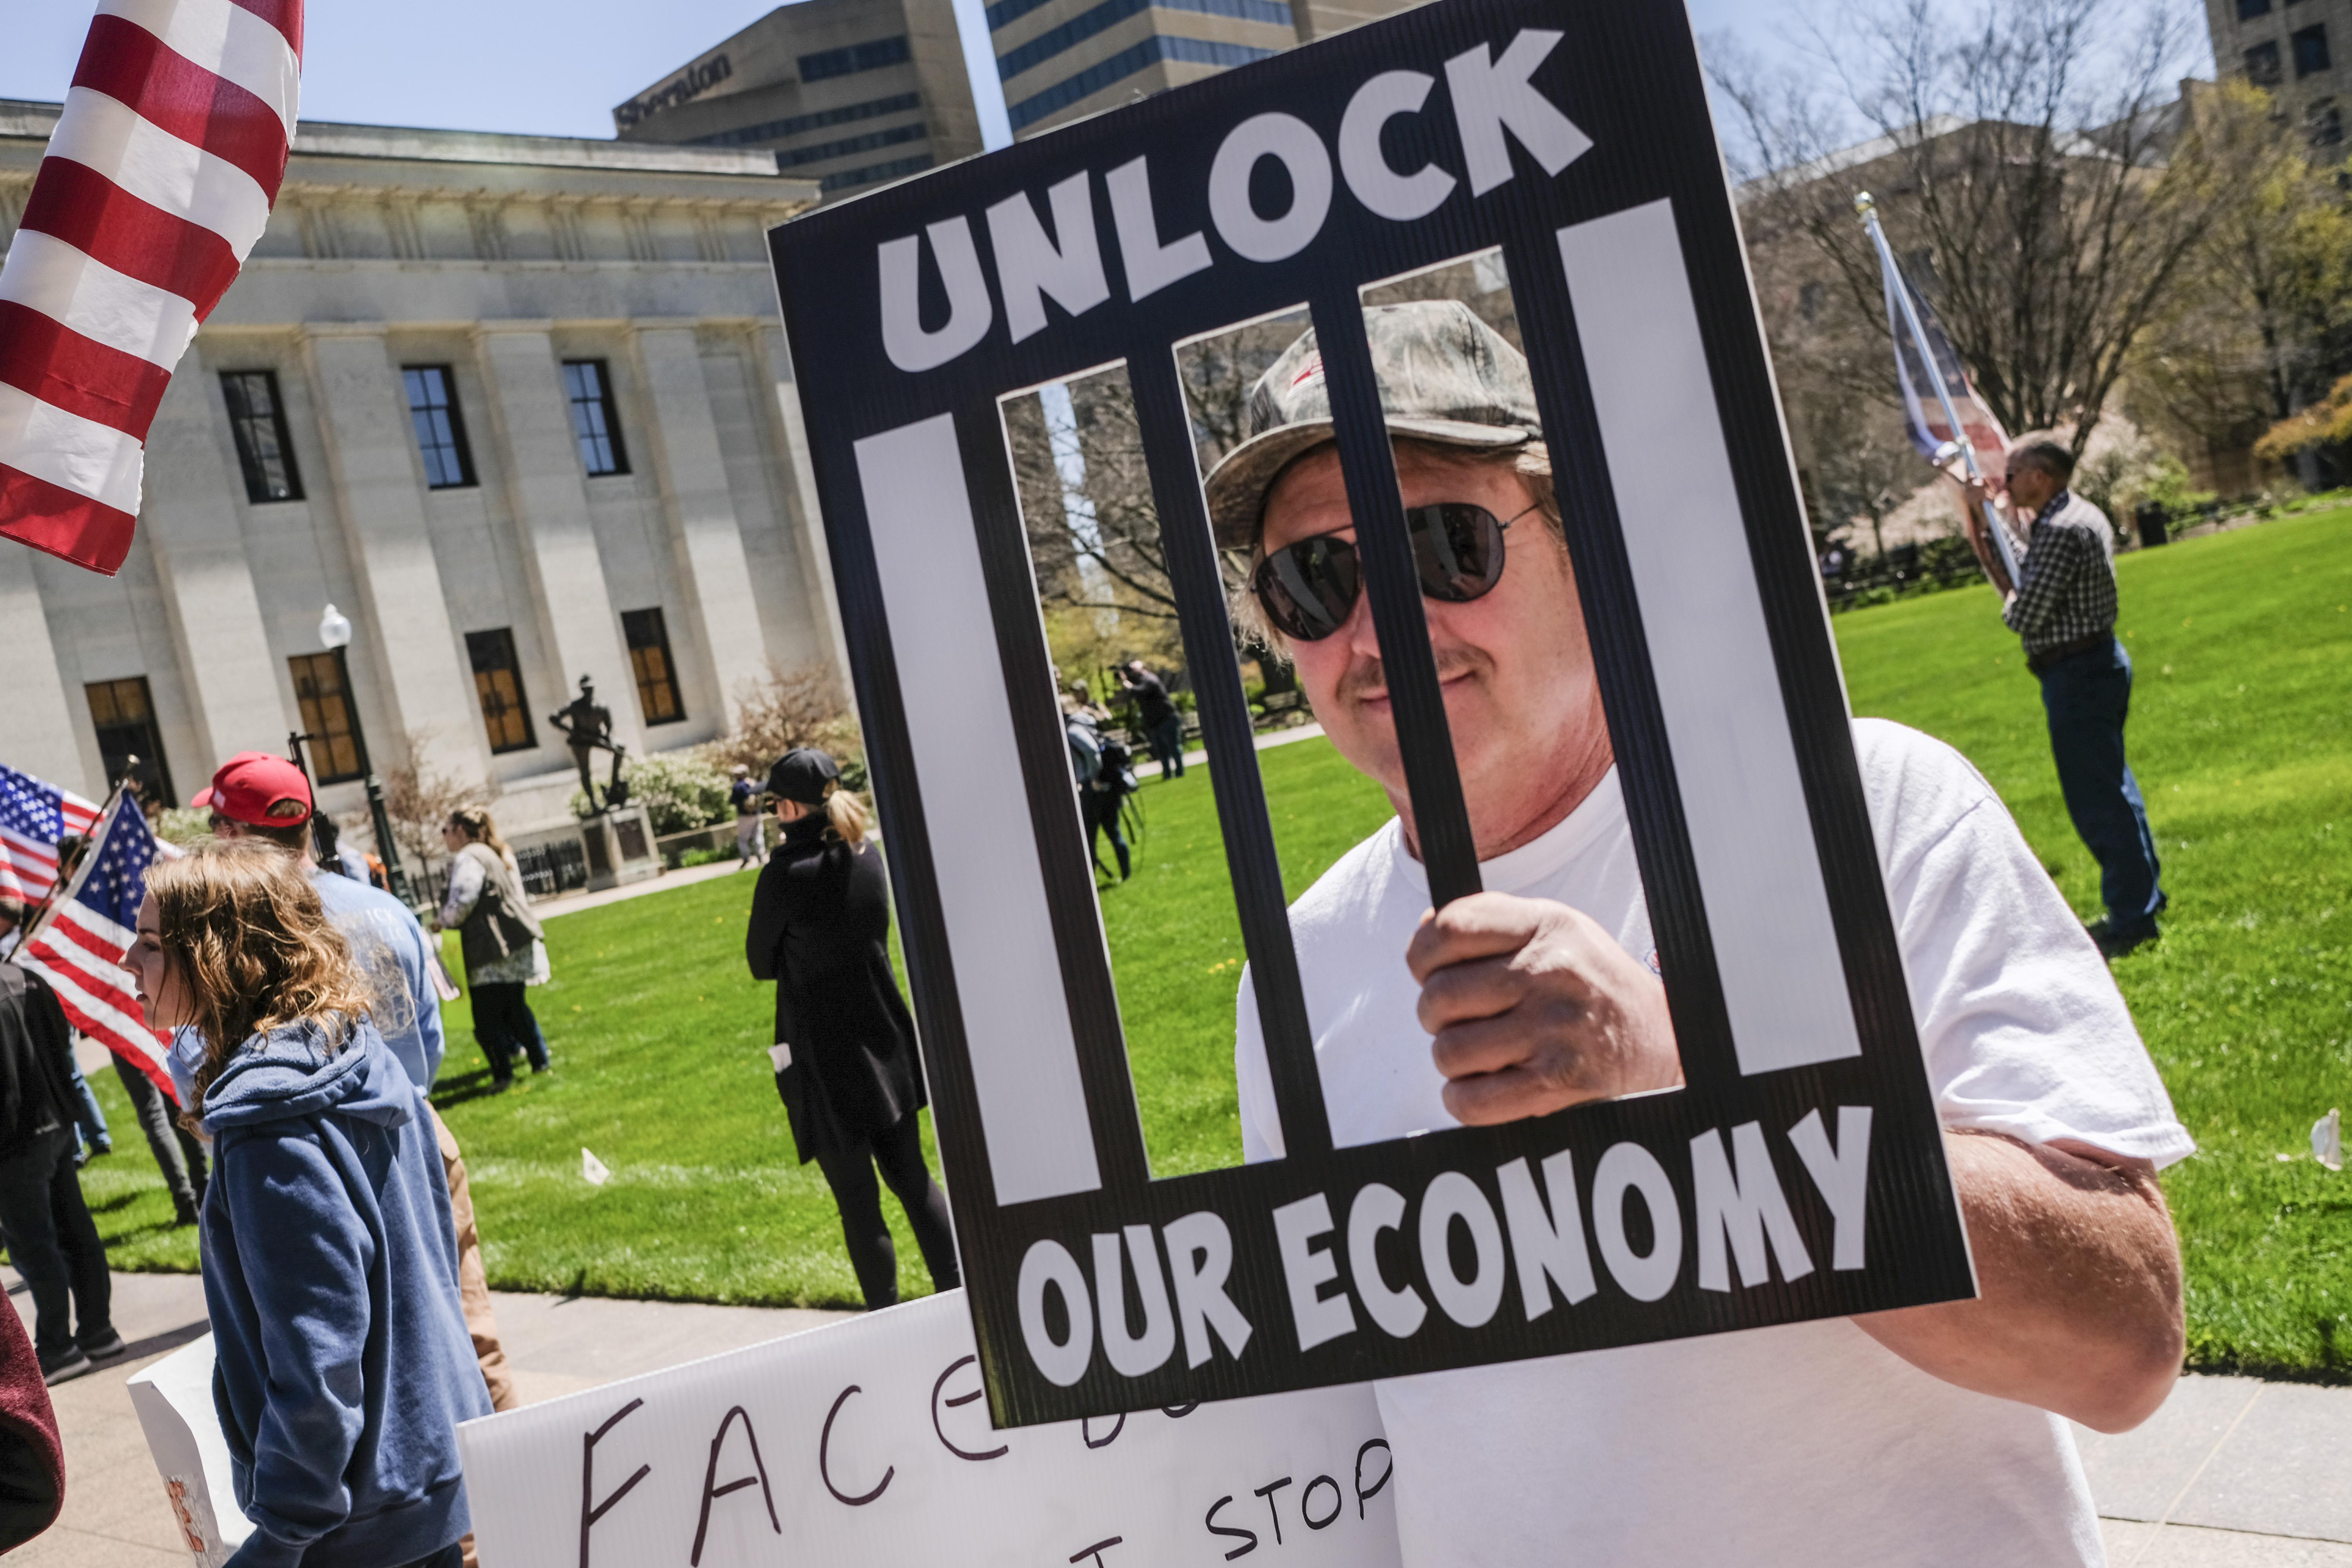 A man in a white t-shirt and sunglasses carries a sign that reads "UNLOCK OUR ECONOMY."